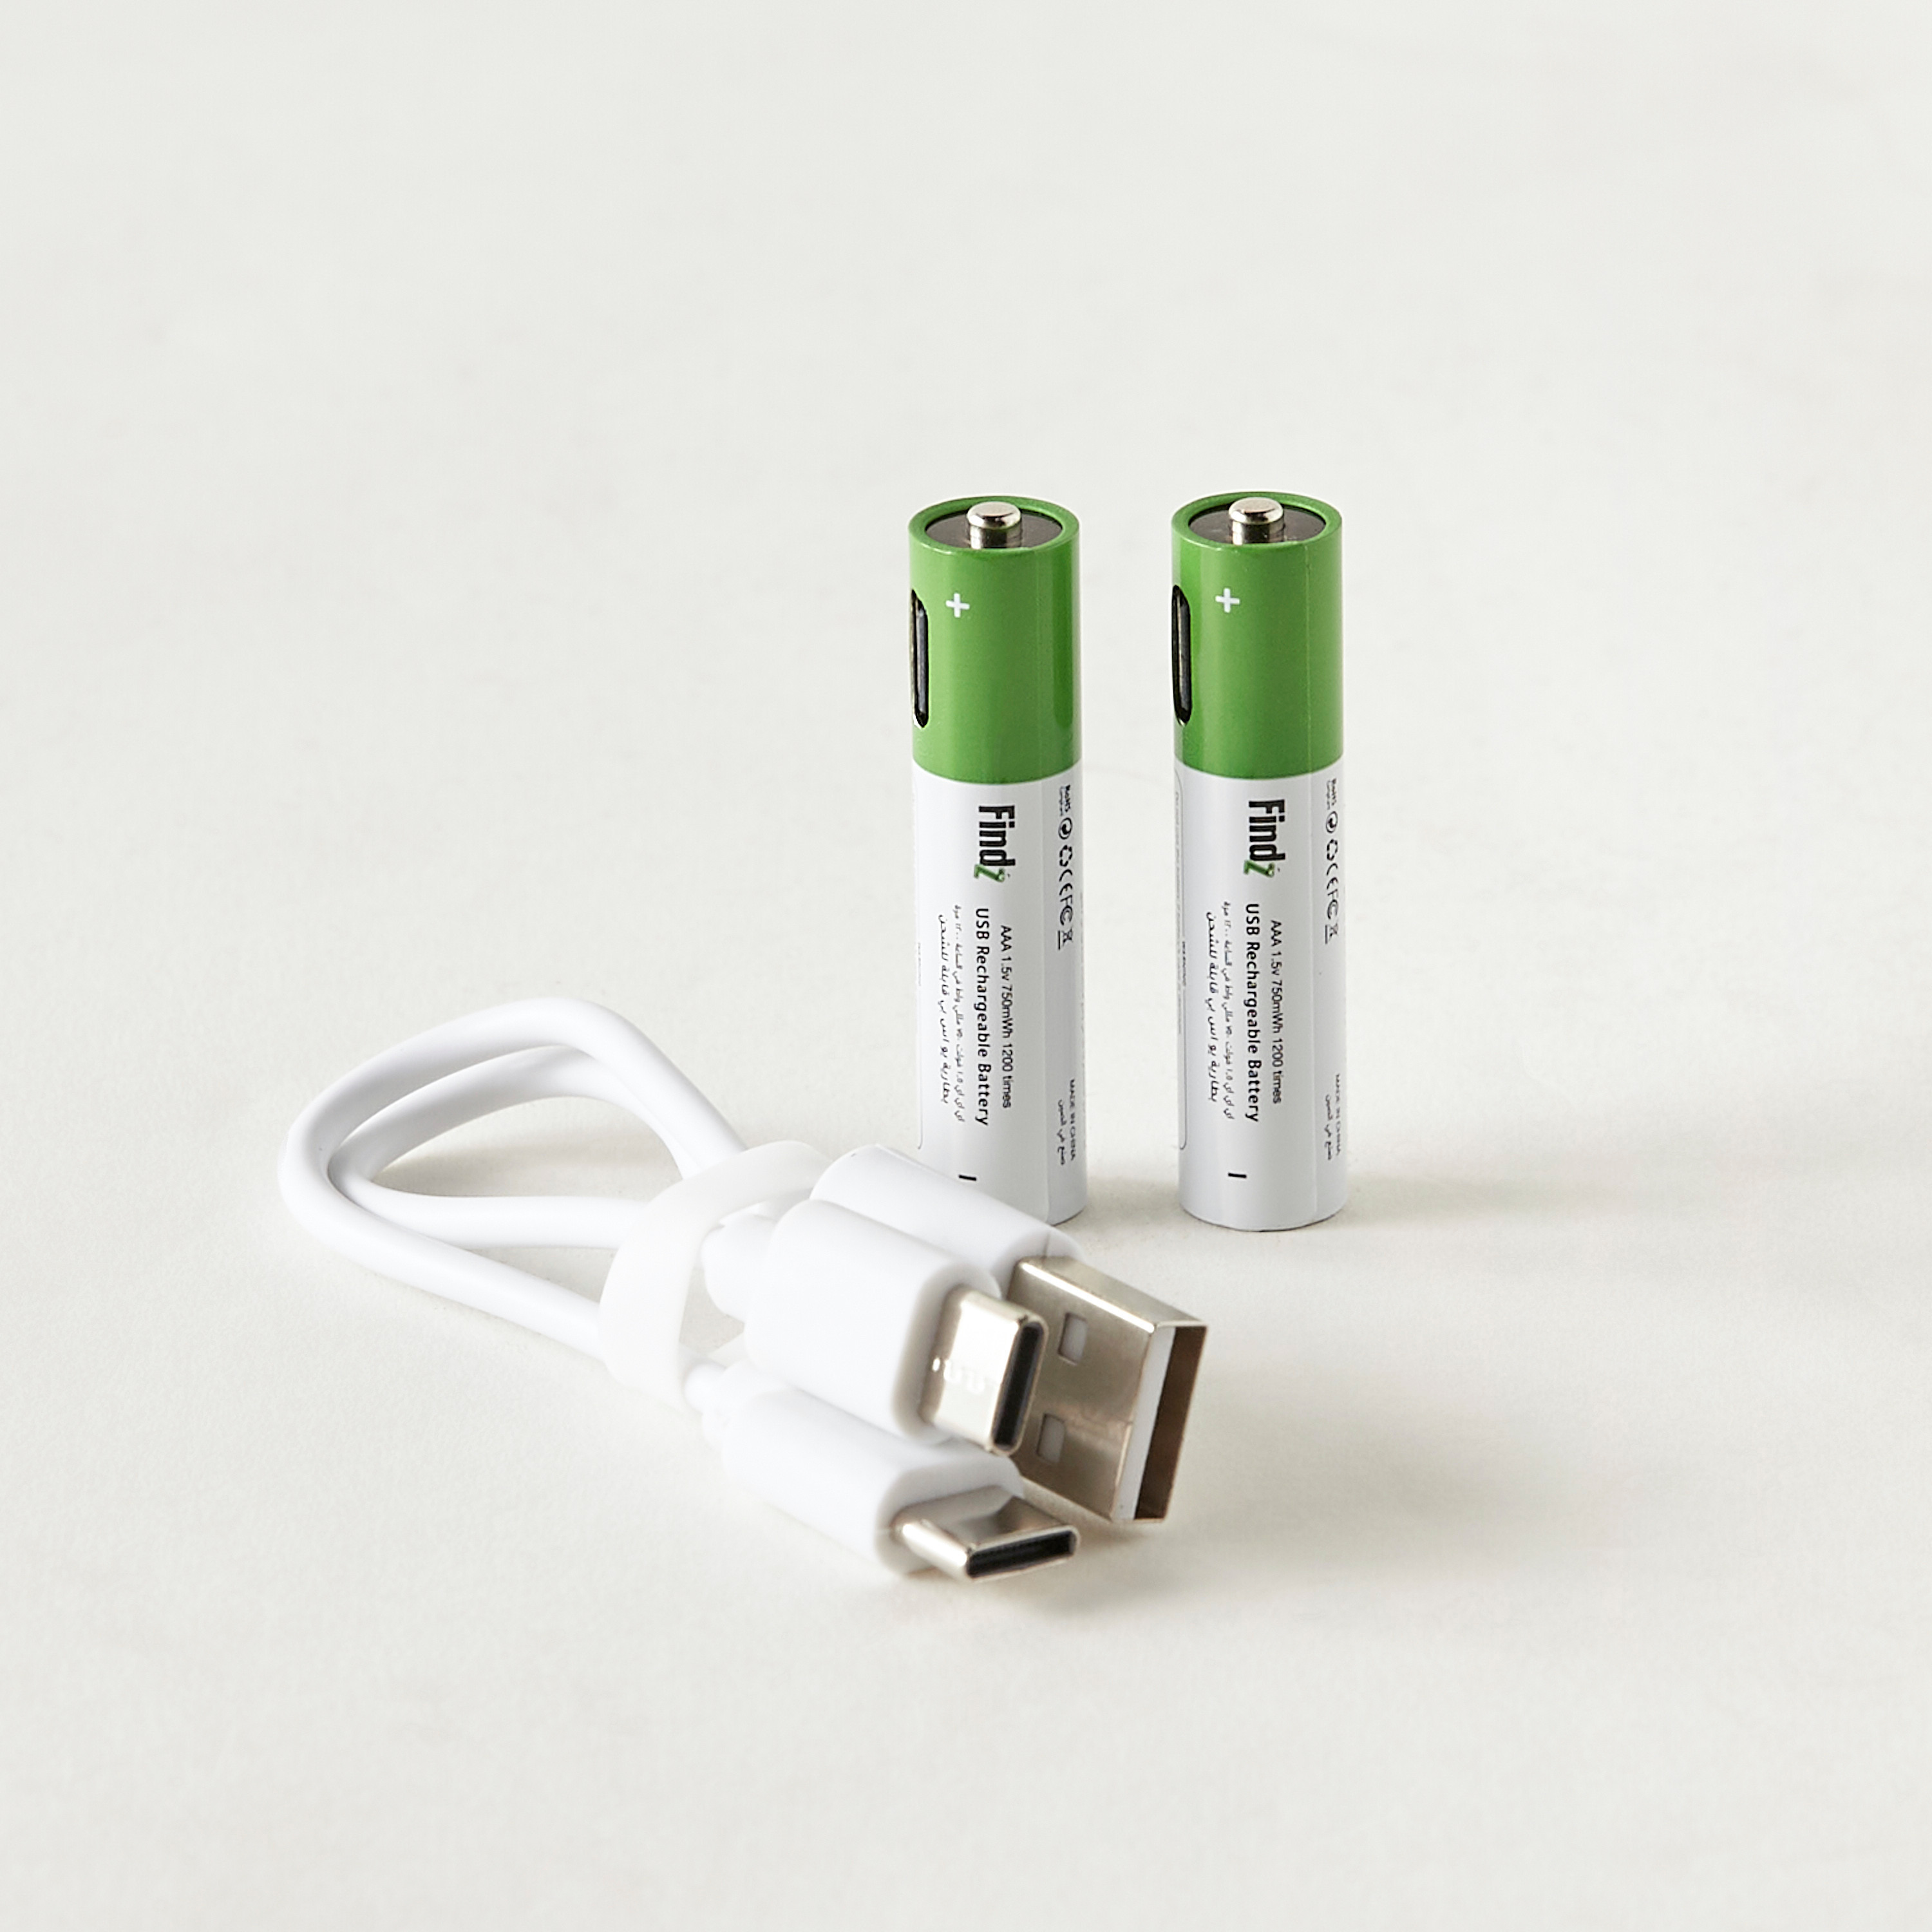 Buy Findz AAA Lithium Rechargeable Battery Set Online Centrepoint Oman